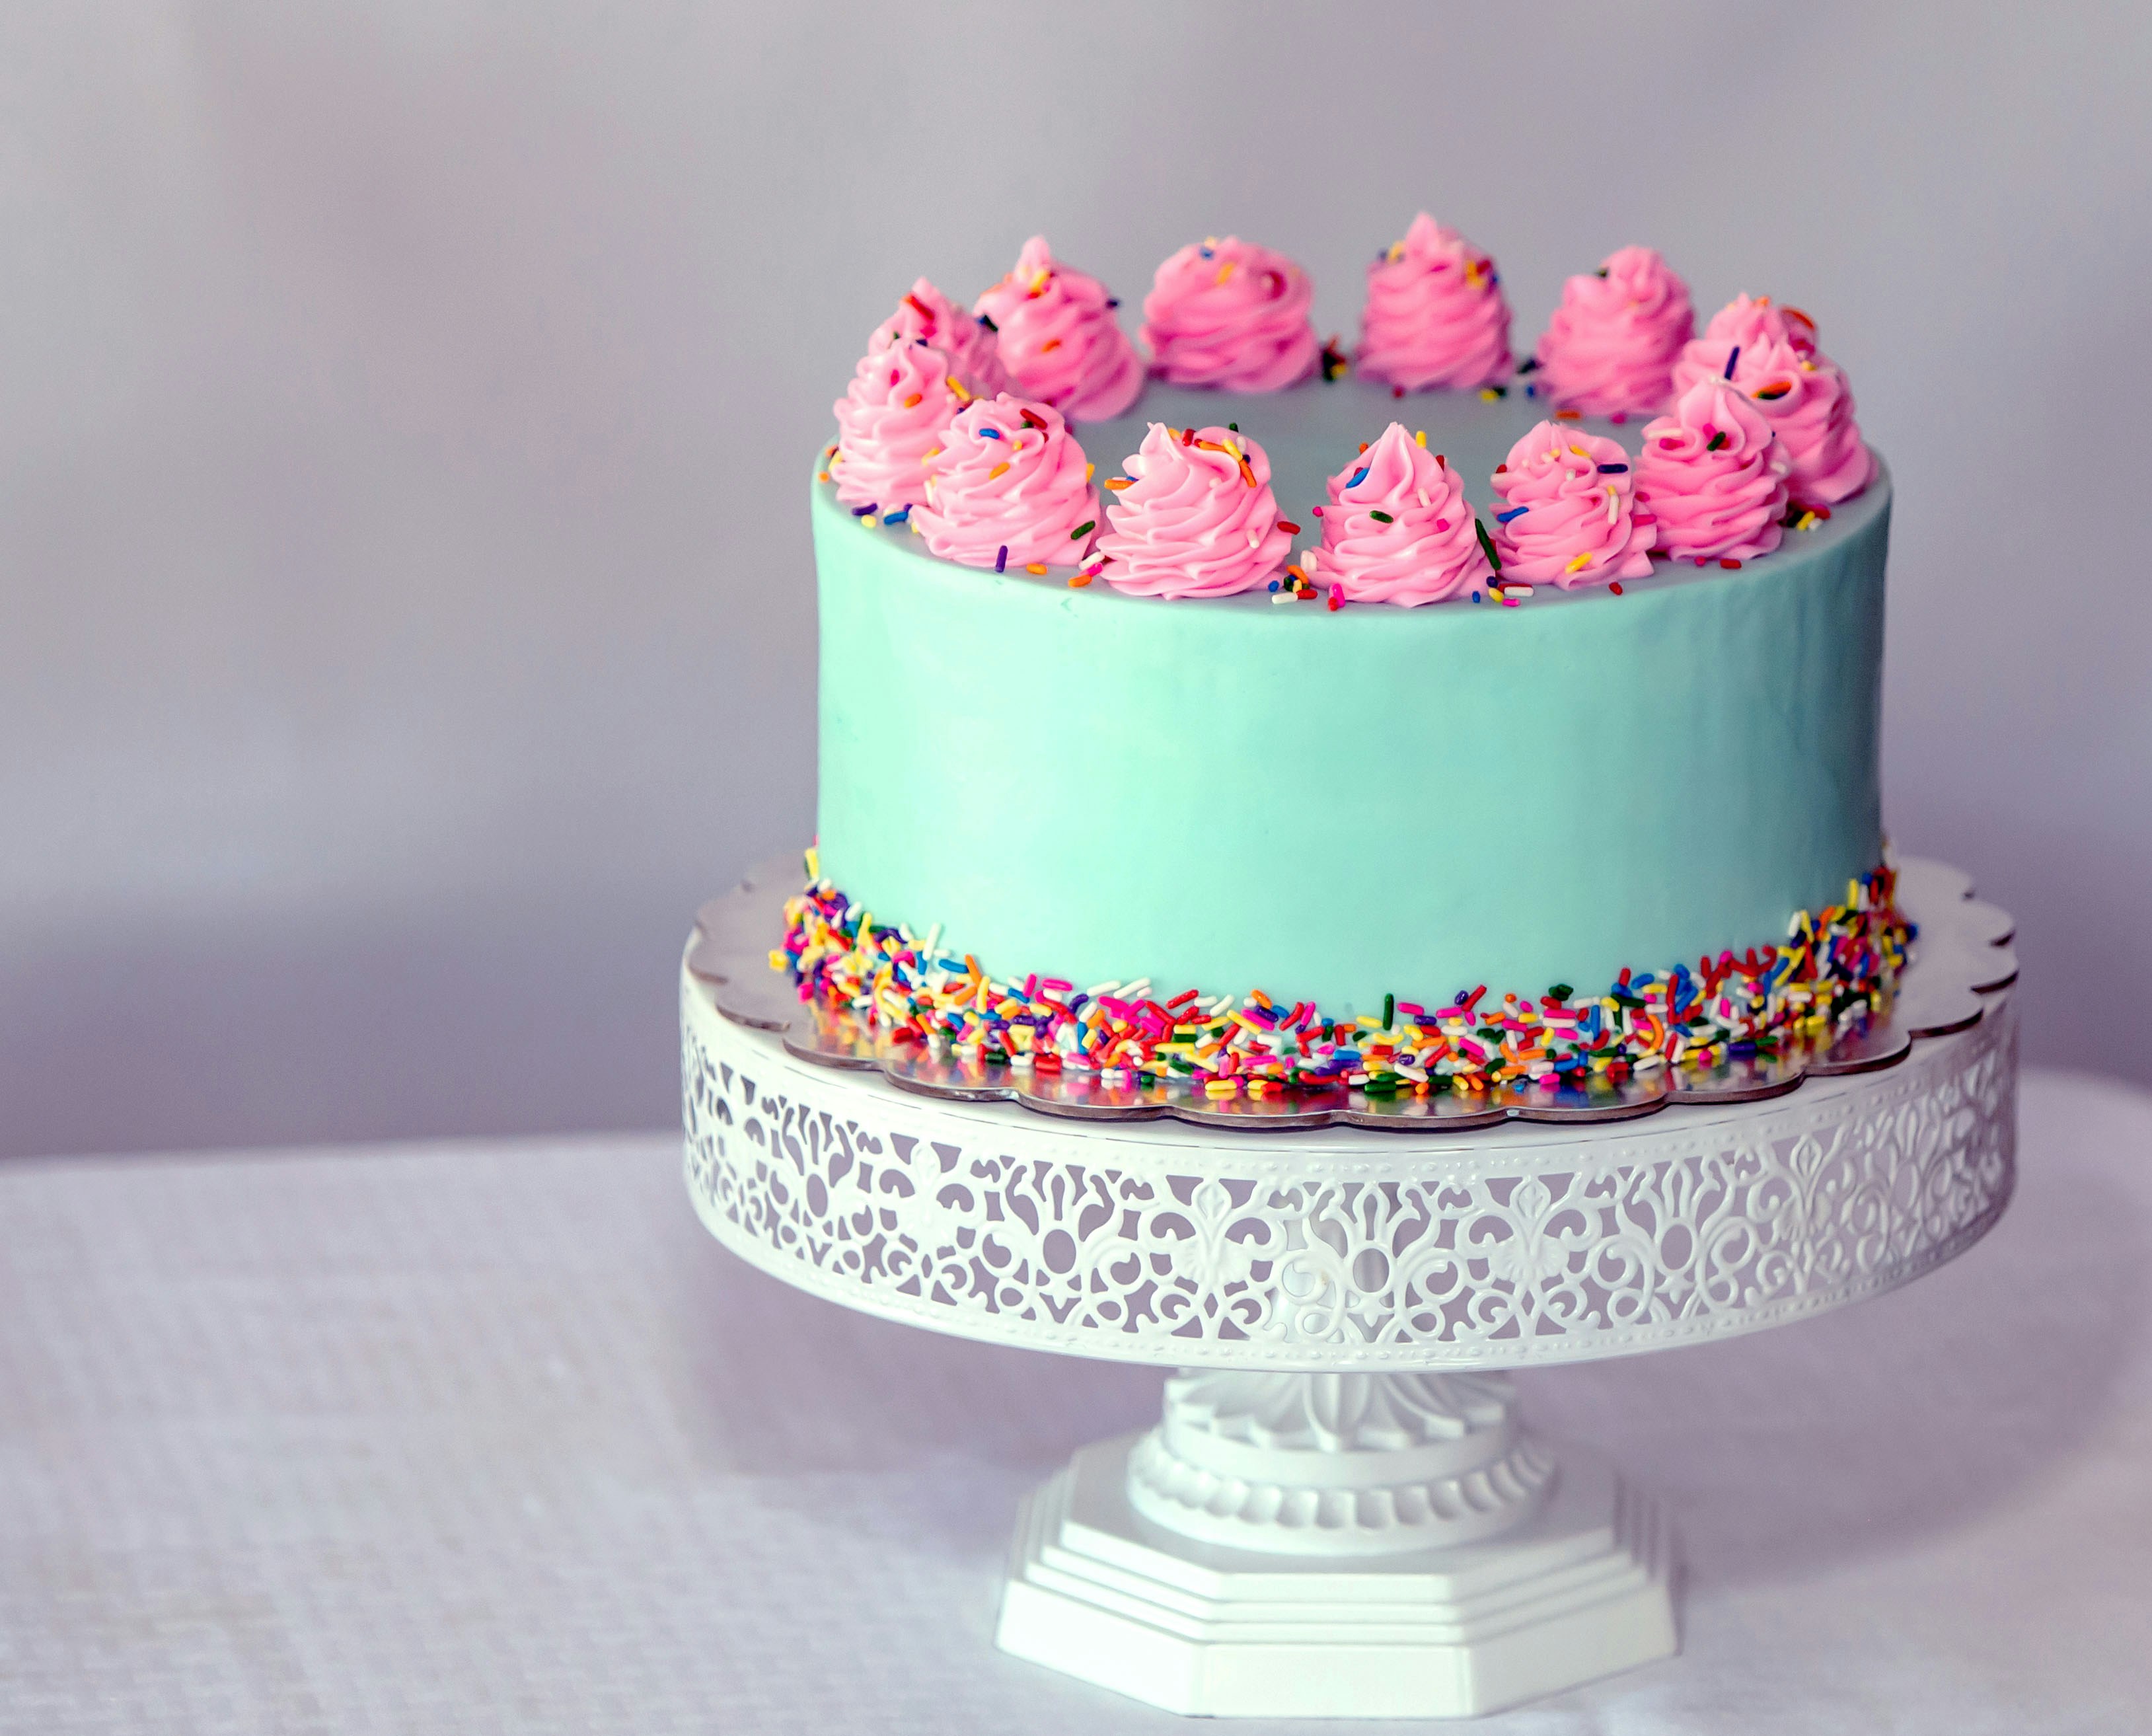 A cheerful birthday cake, bursting with excitement and joy.